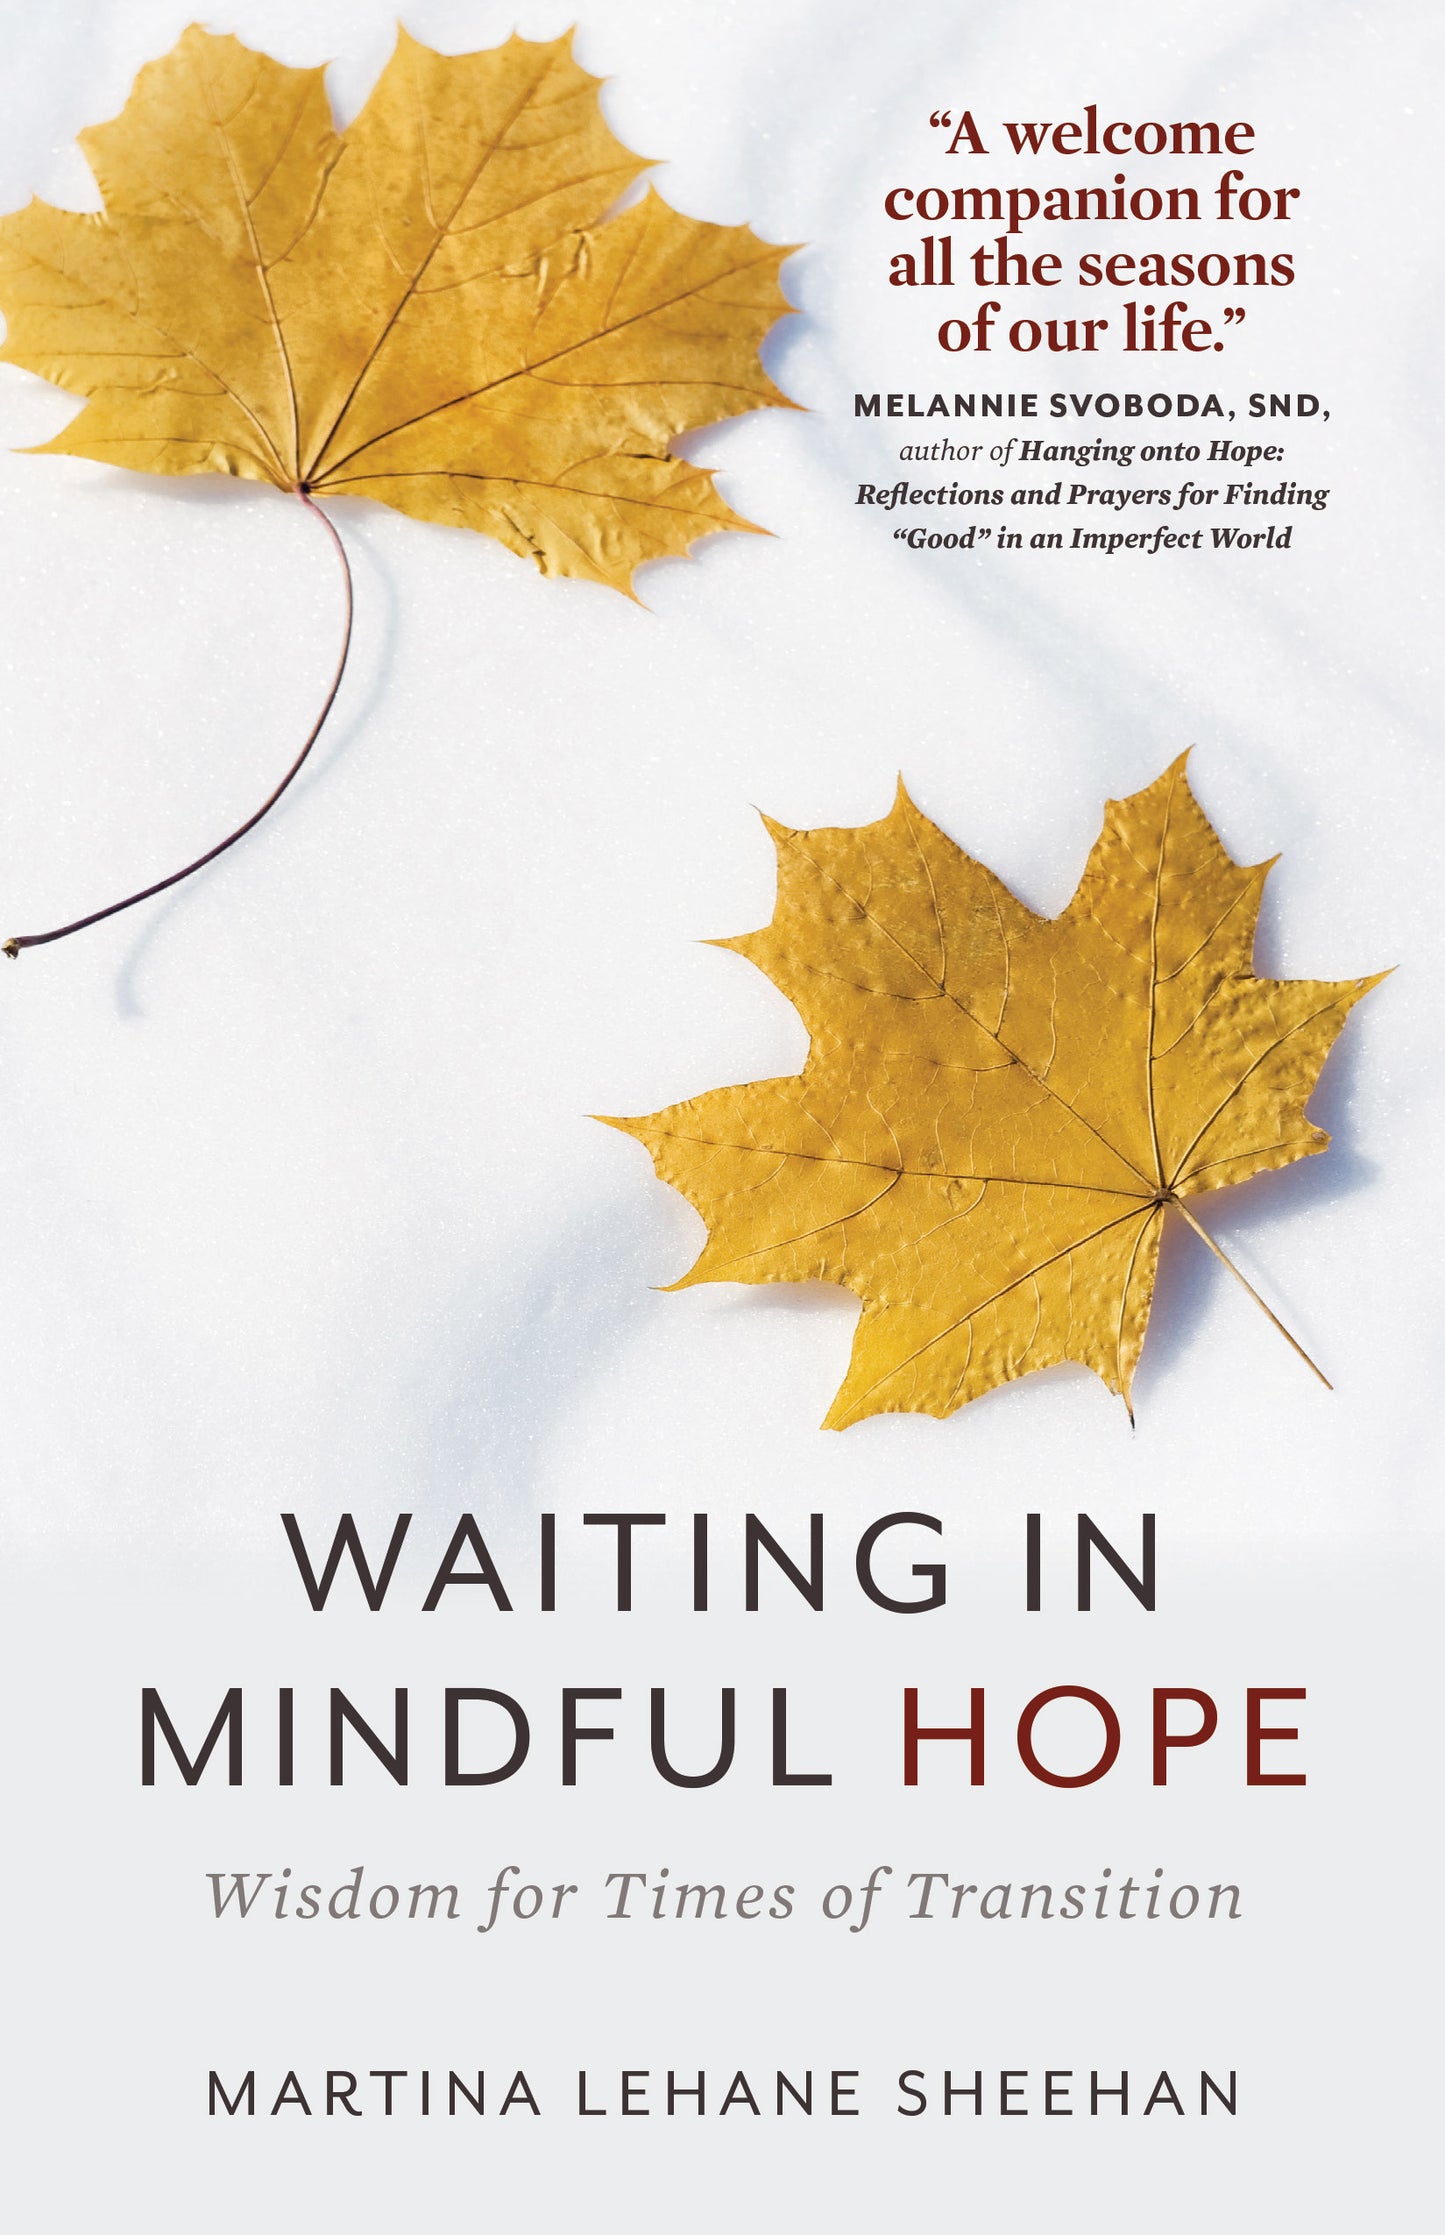 SALE - Waiting in Mindful Hope